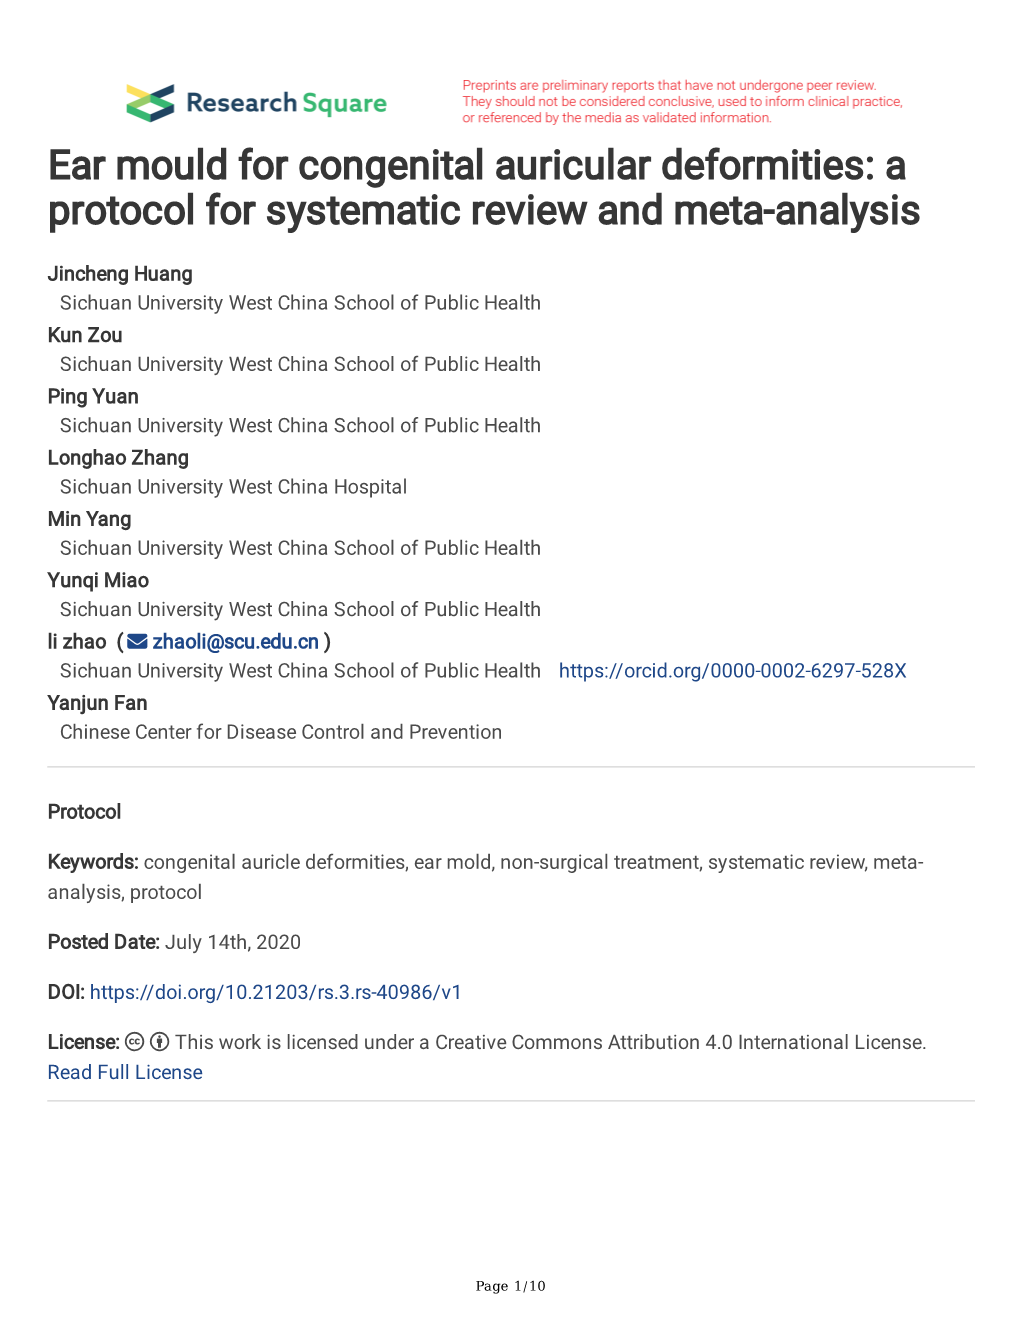 Ear Mould for Congenital Auricular Deformities: a Protocol for Systematic Review and Meta-Analysis